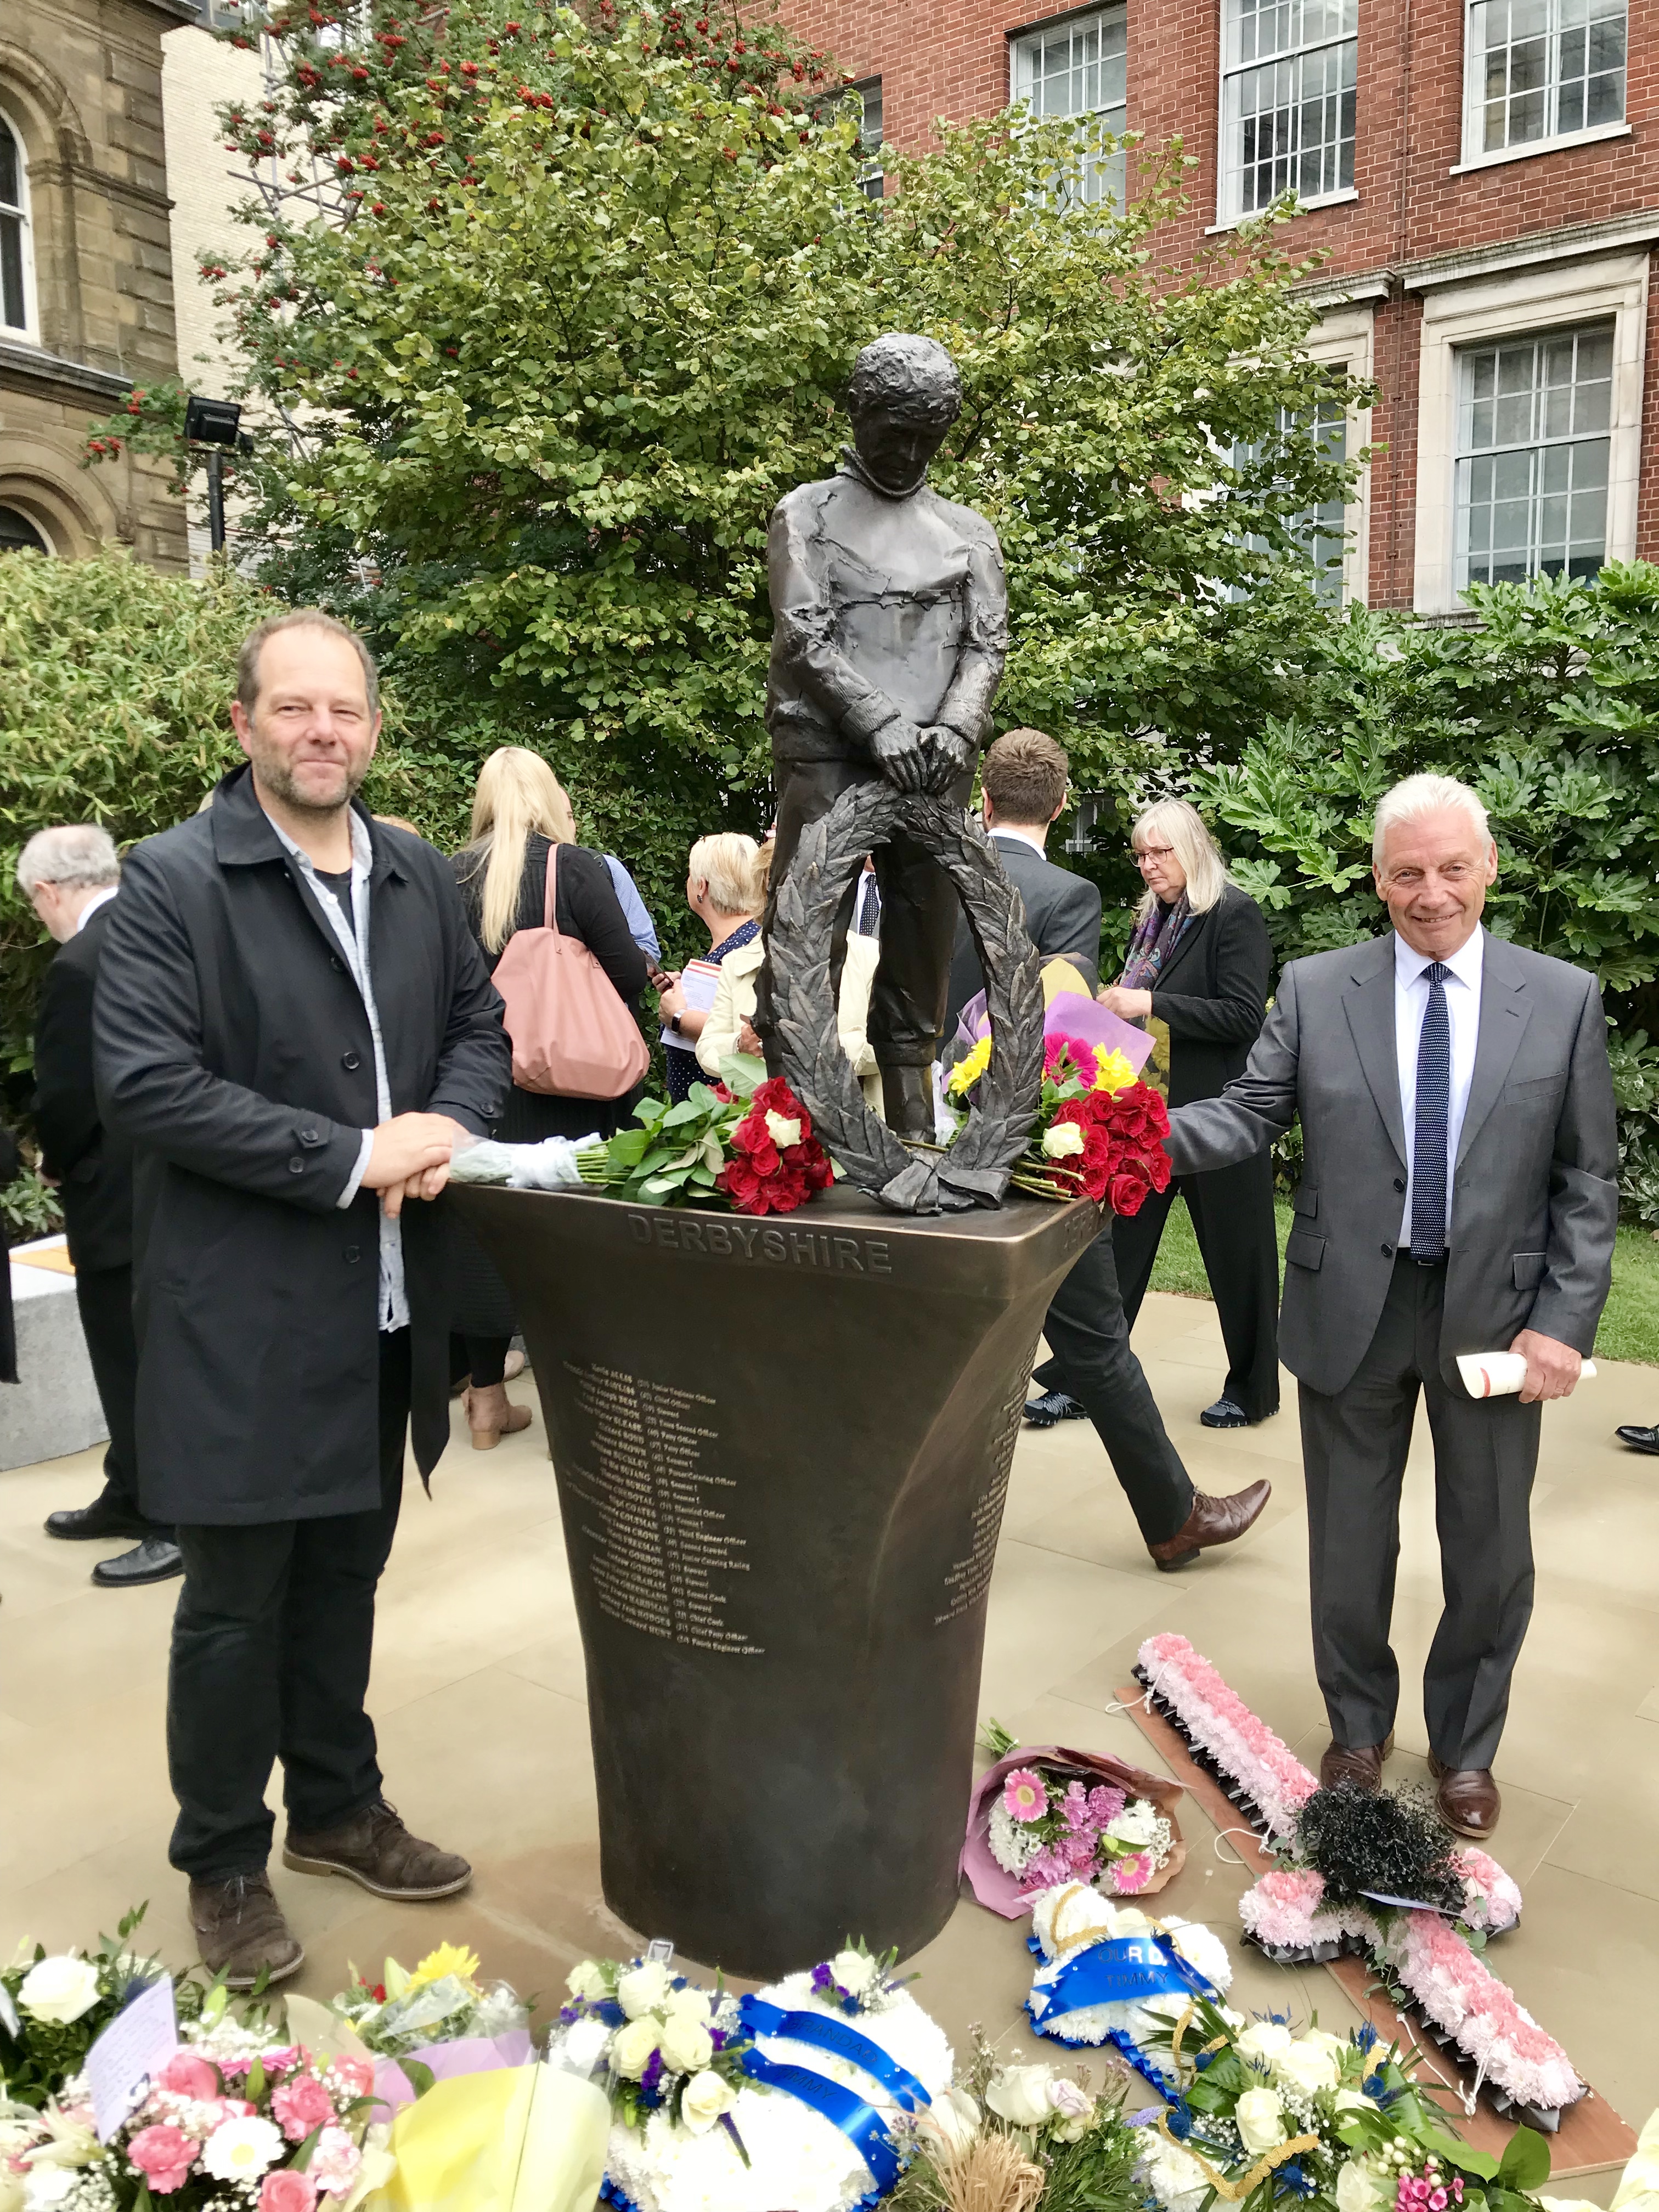 Chris Butler and Tony Evans with the Derbyshire Memorial Sculpture